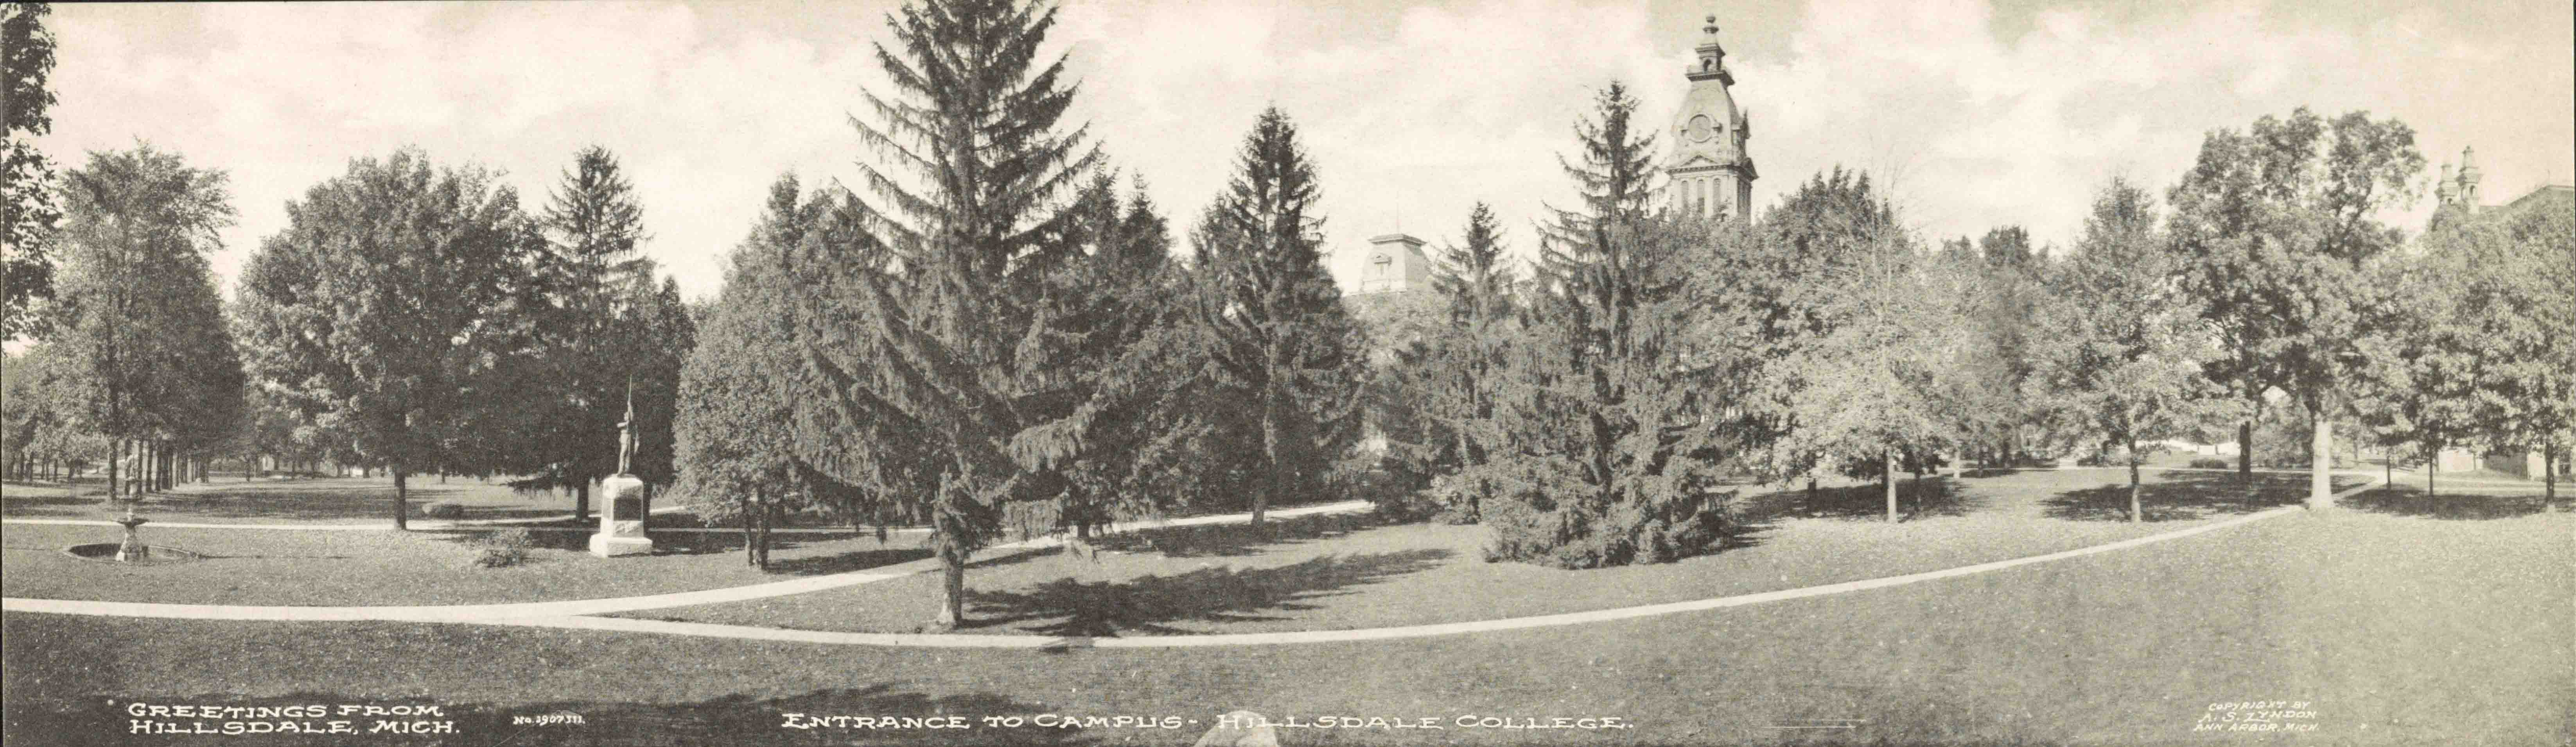 Greetings from Hillsdale, Michigan. Entrance to campus, Hillsdale College. Photo by A.S. Lyndon (c. 1908). Library of Congress. PD-No known restrictions. Wikimedia Commons.